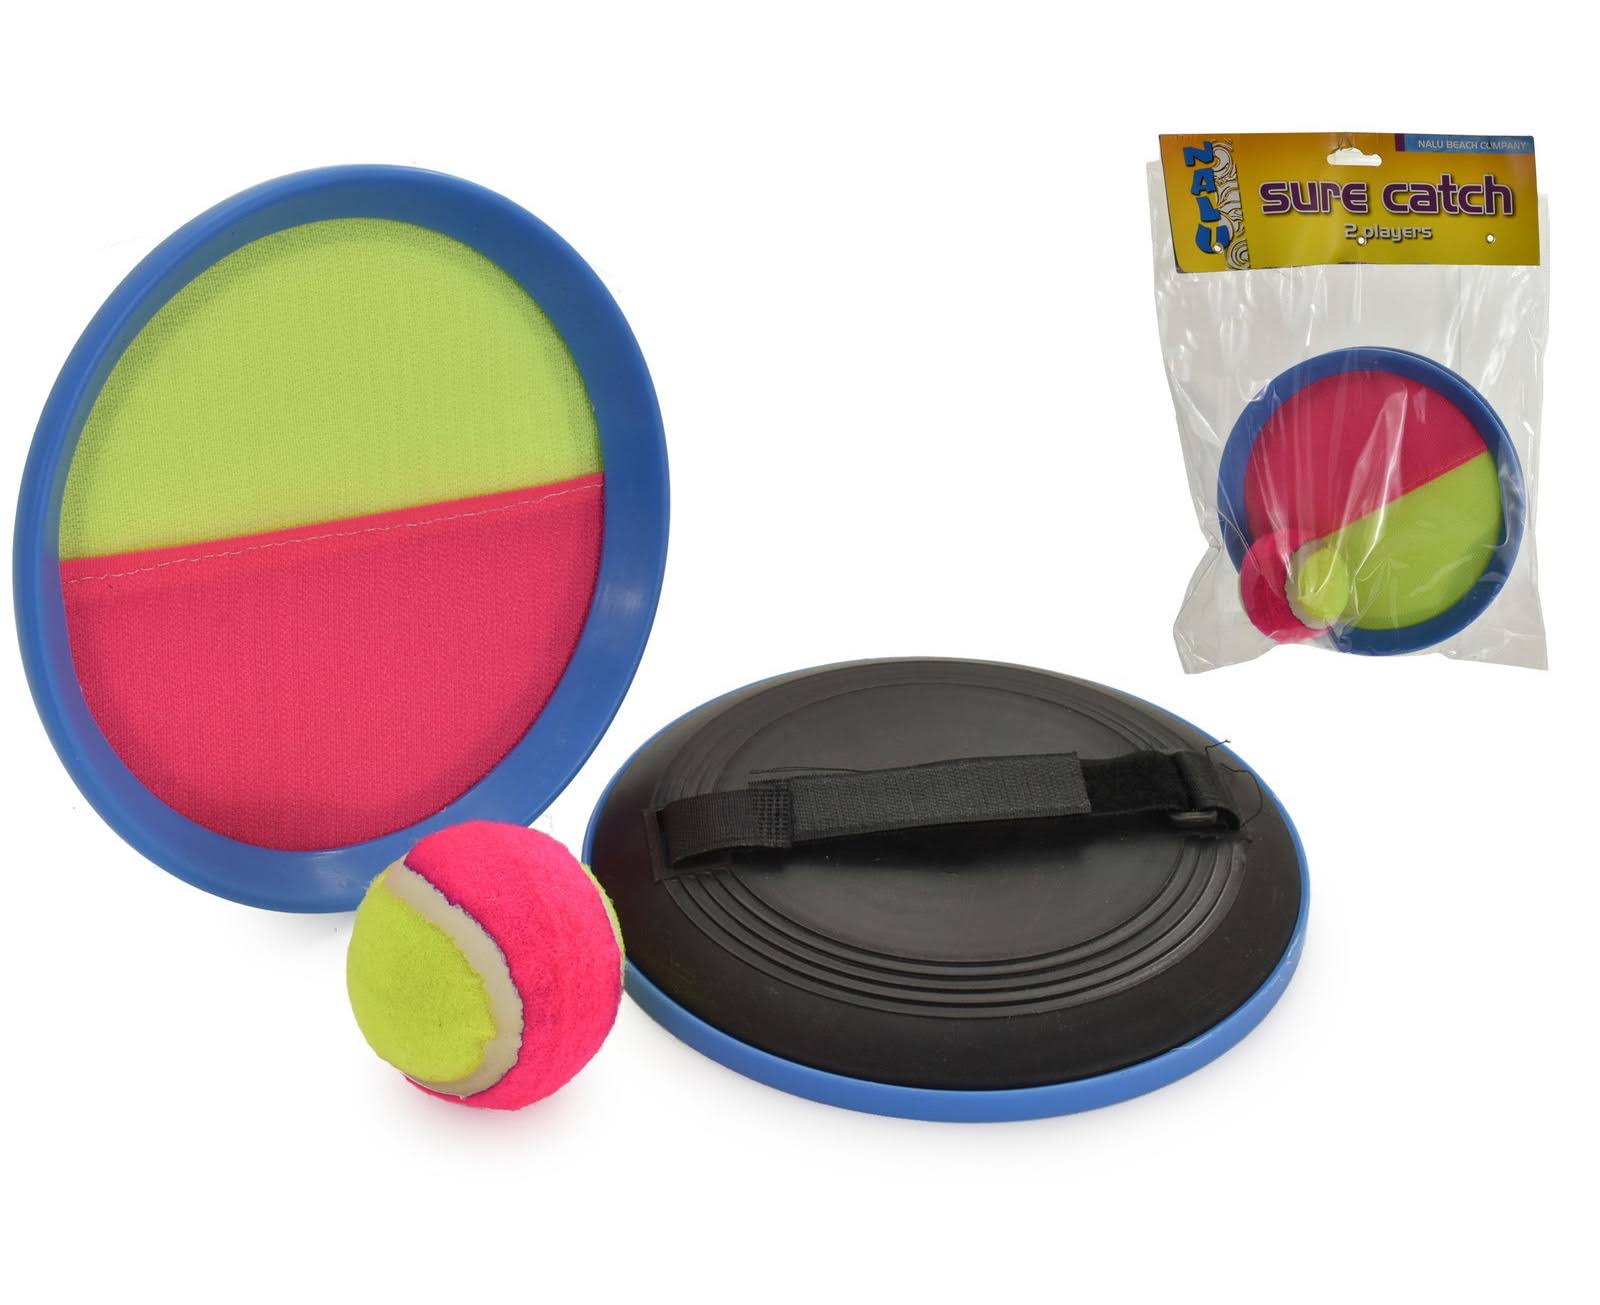 Nalu Beach Velcro Catch Game - for 2 Players